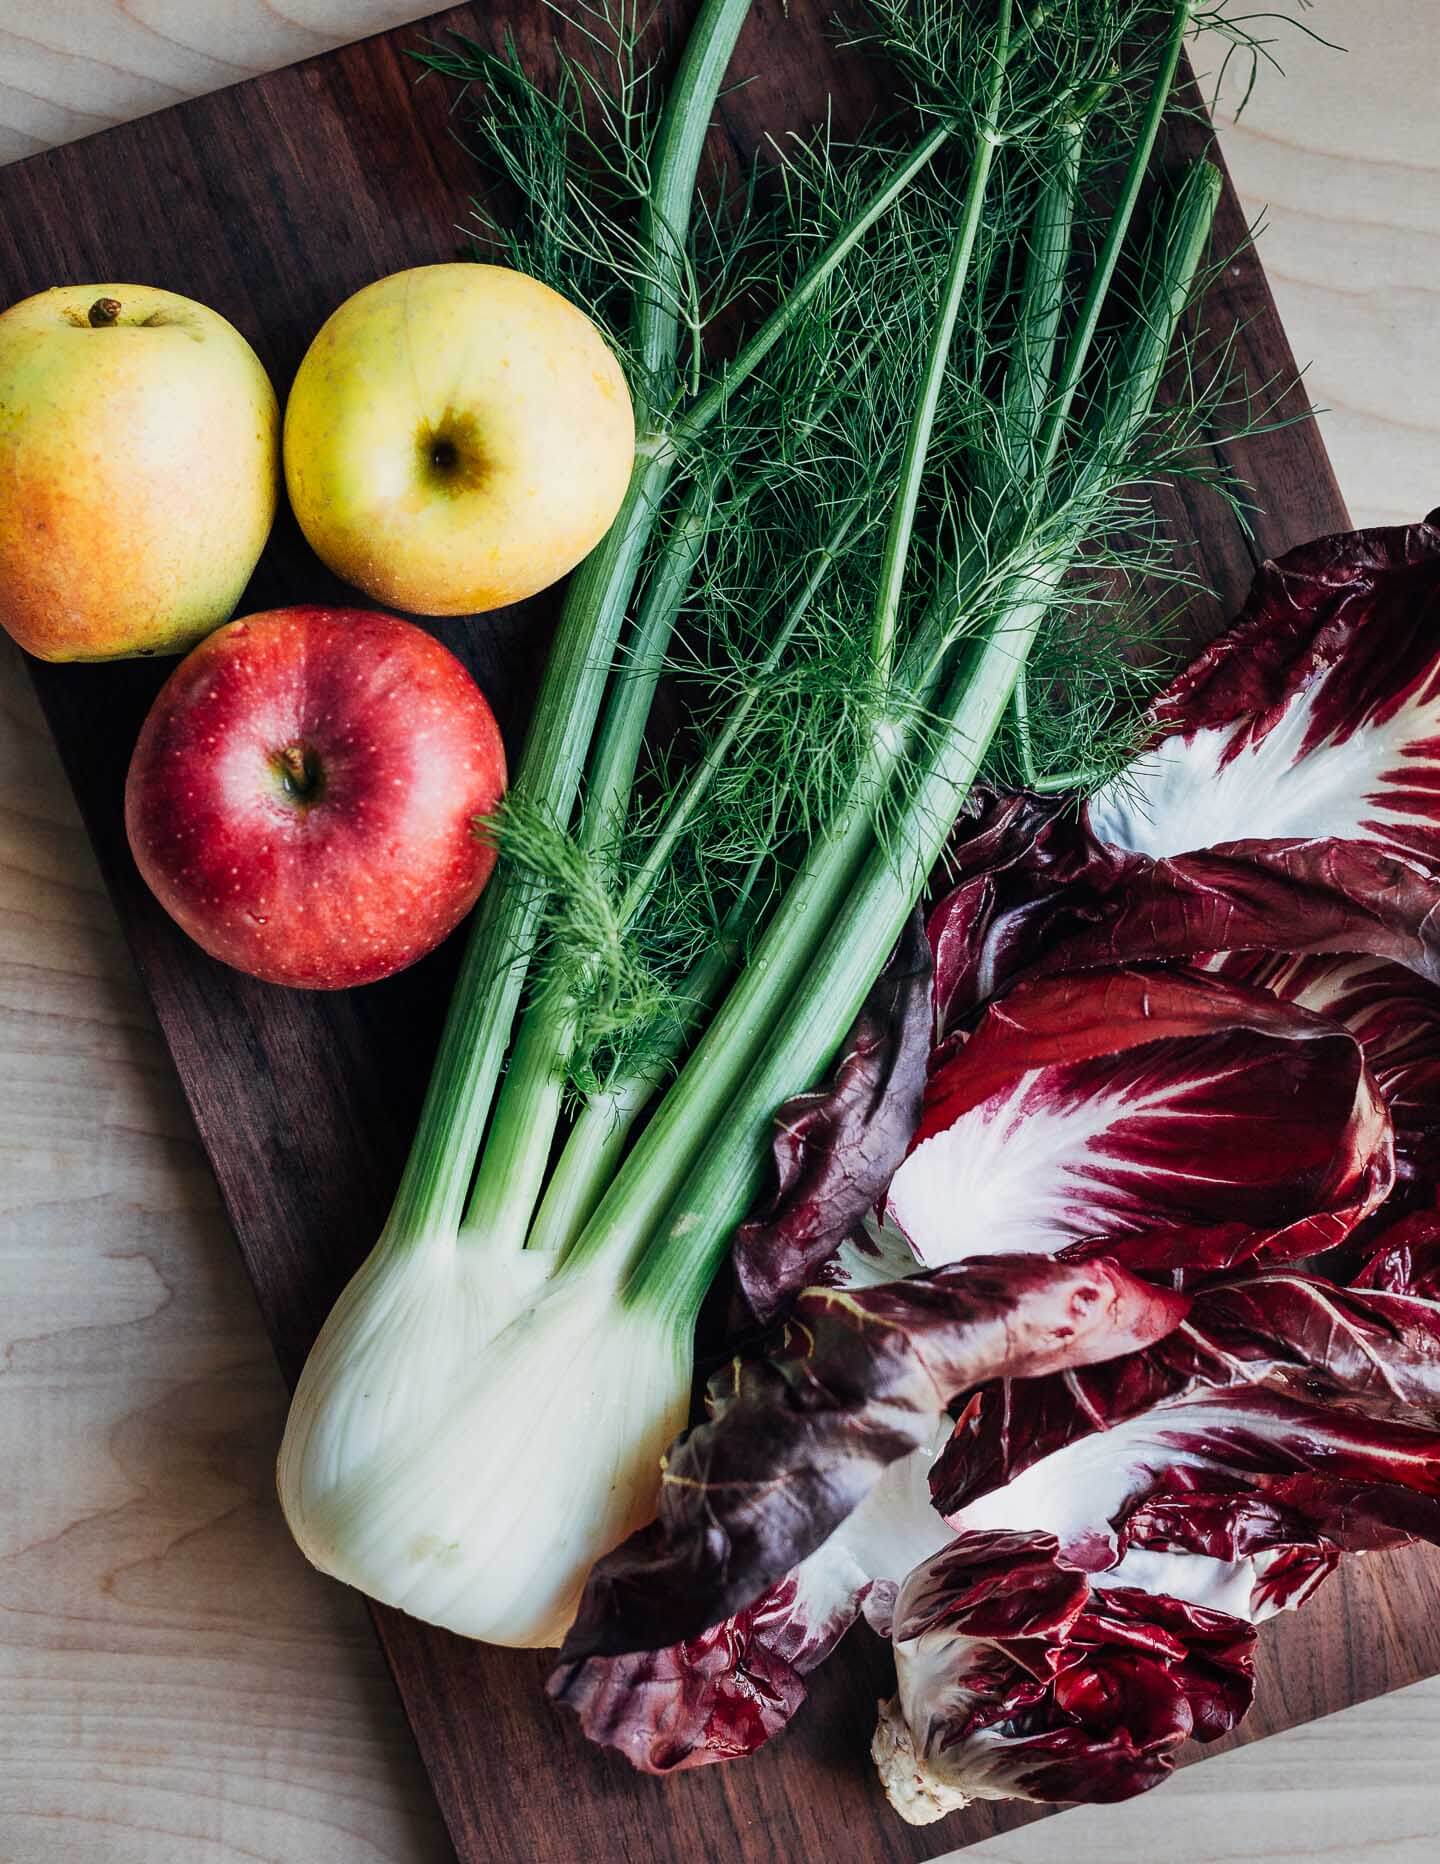 A cutting board with a fennel bulb, apples, and radicchio leaves